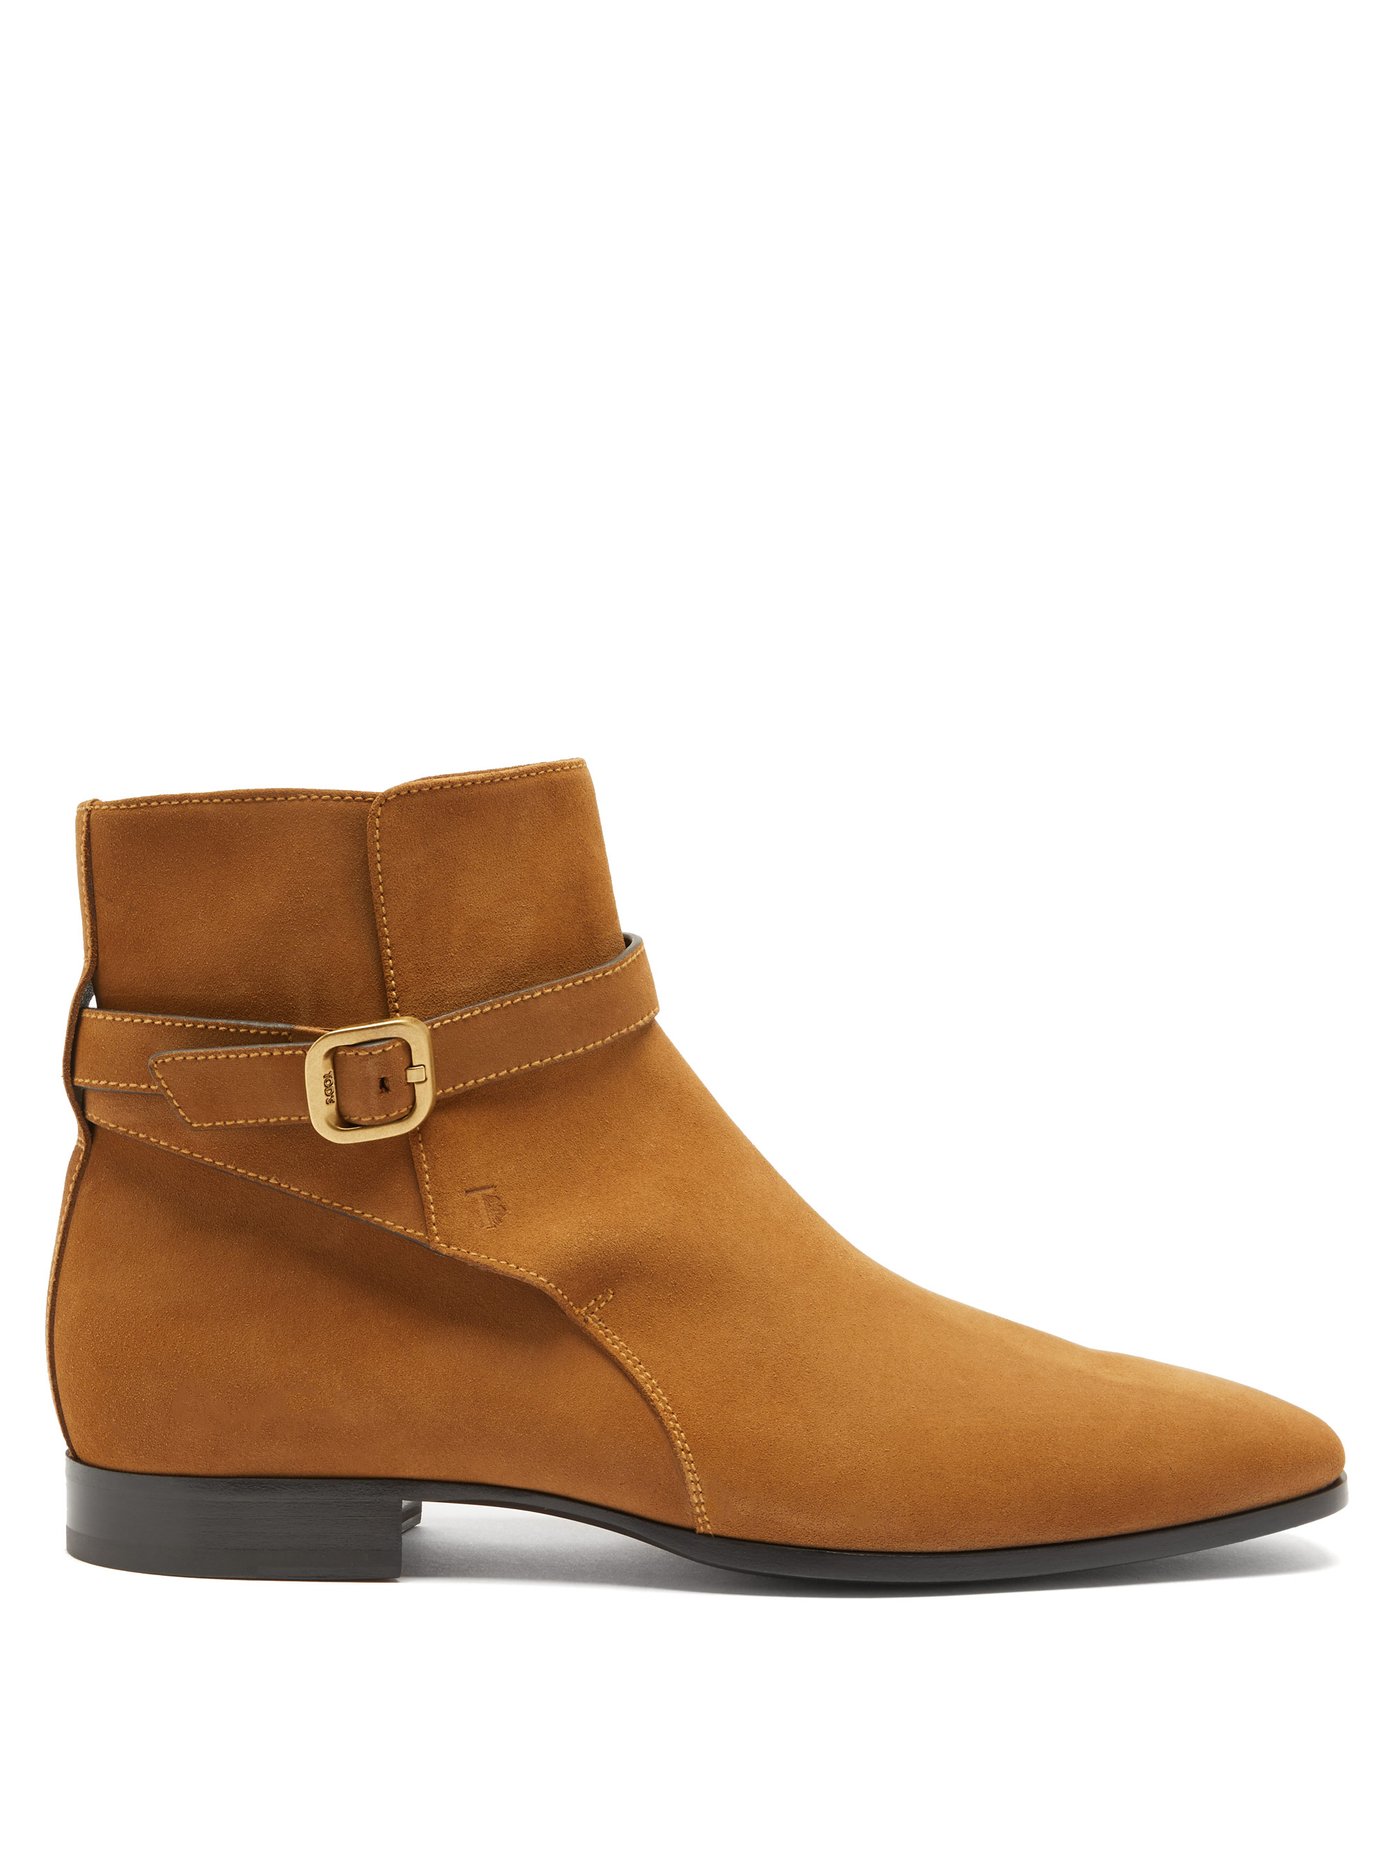 tods suede ankle boots